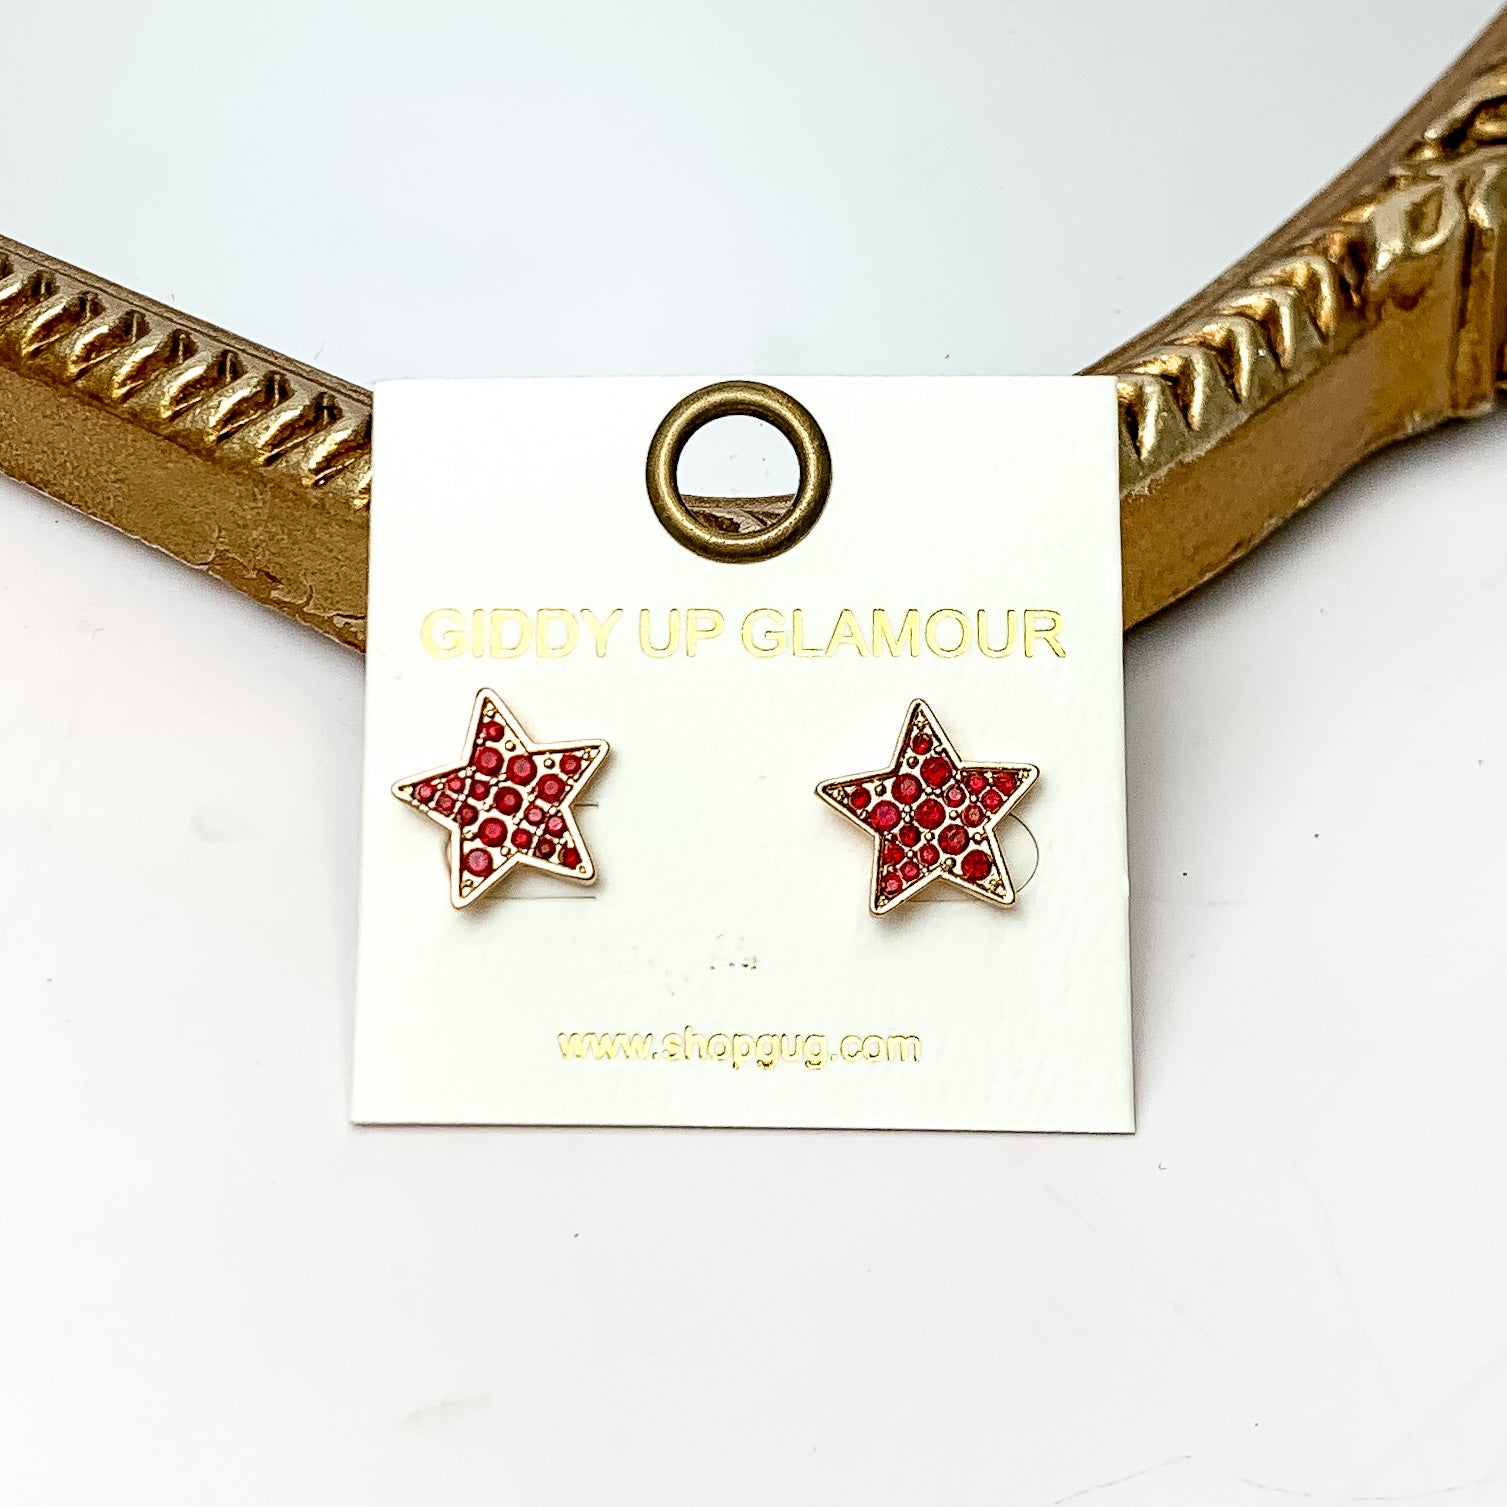 Star Maroon Crystal Stud Earrings in Gold Tone. These earrings are pictured on a white background with a gold frame around.